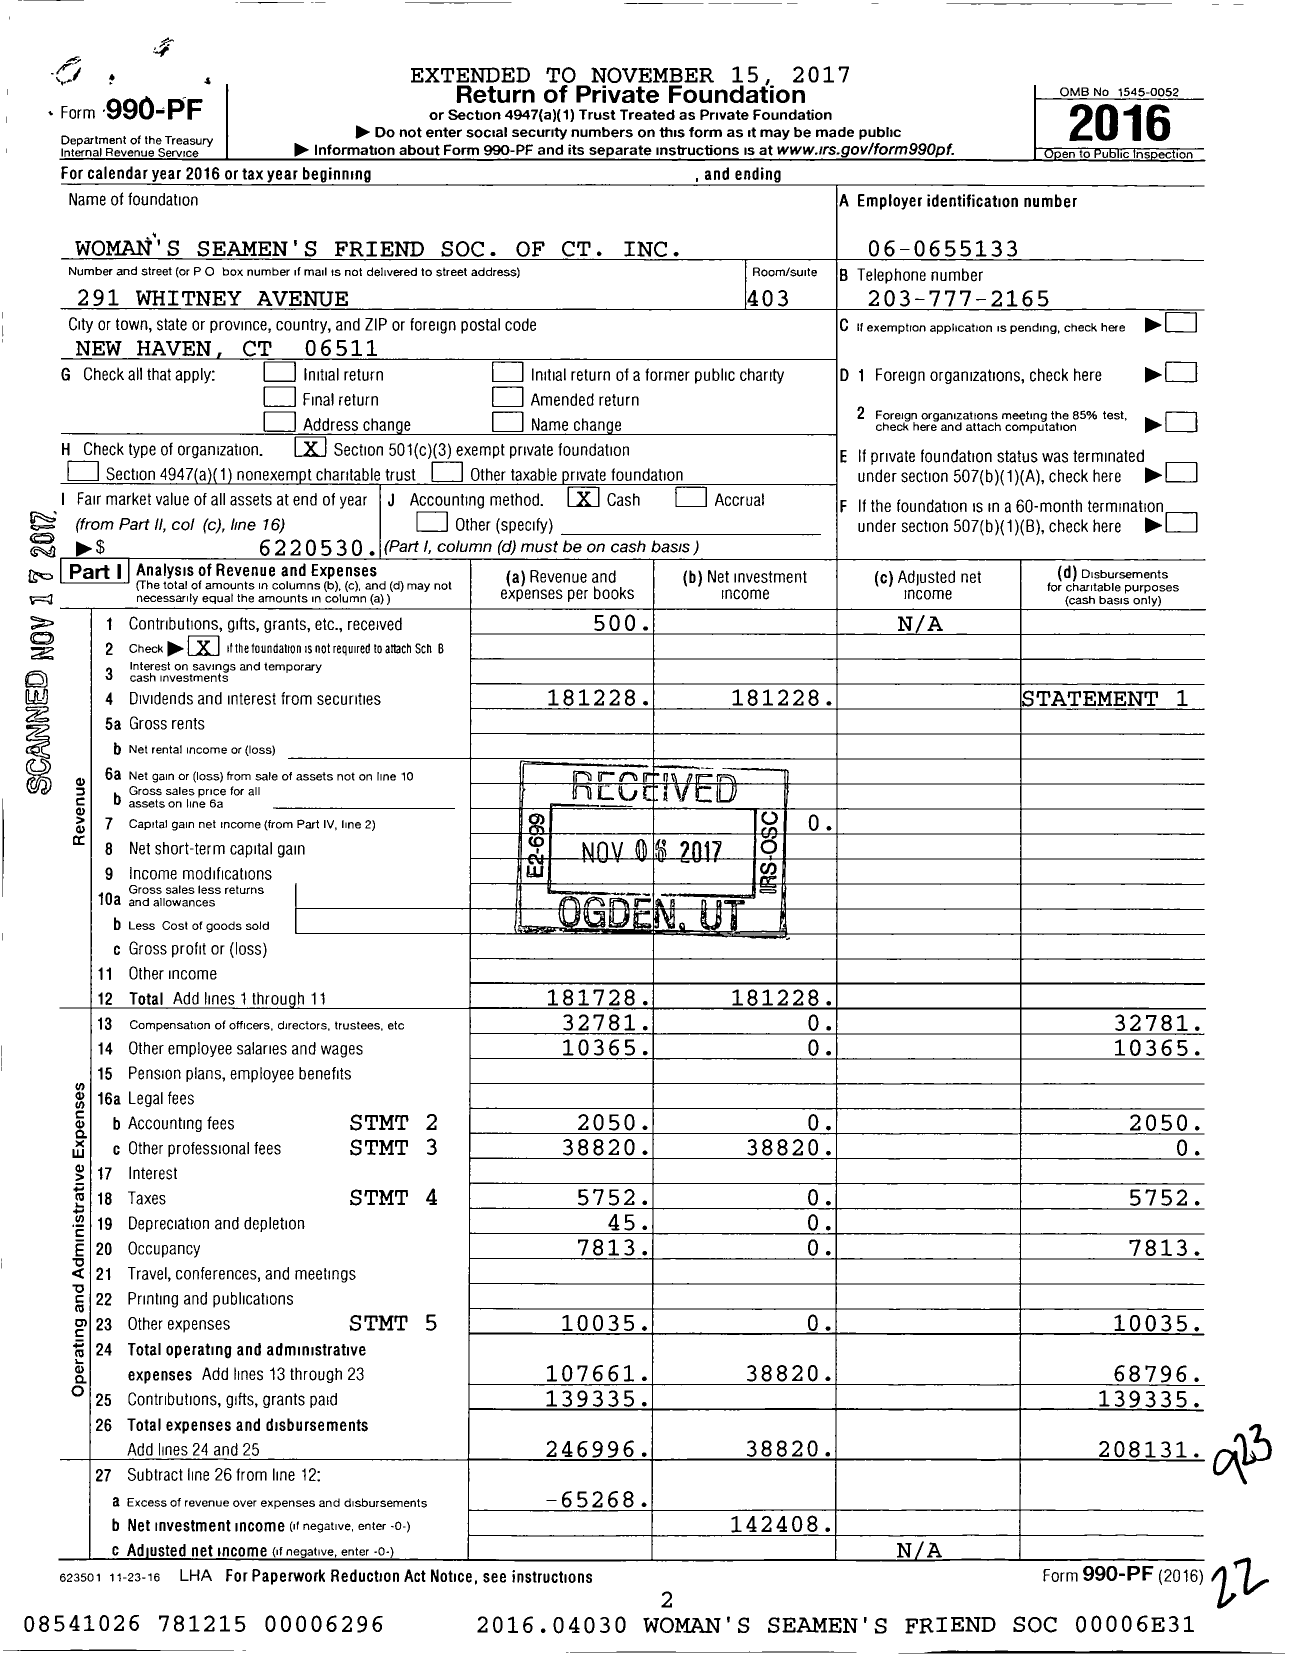 Image of first page of 2016 Form 990PF for Woman's Seamen's Friend Society of CT